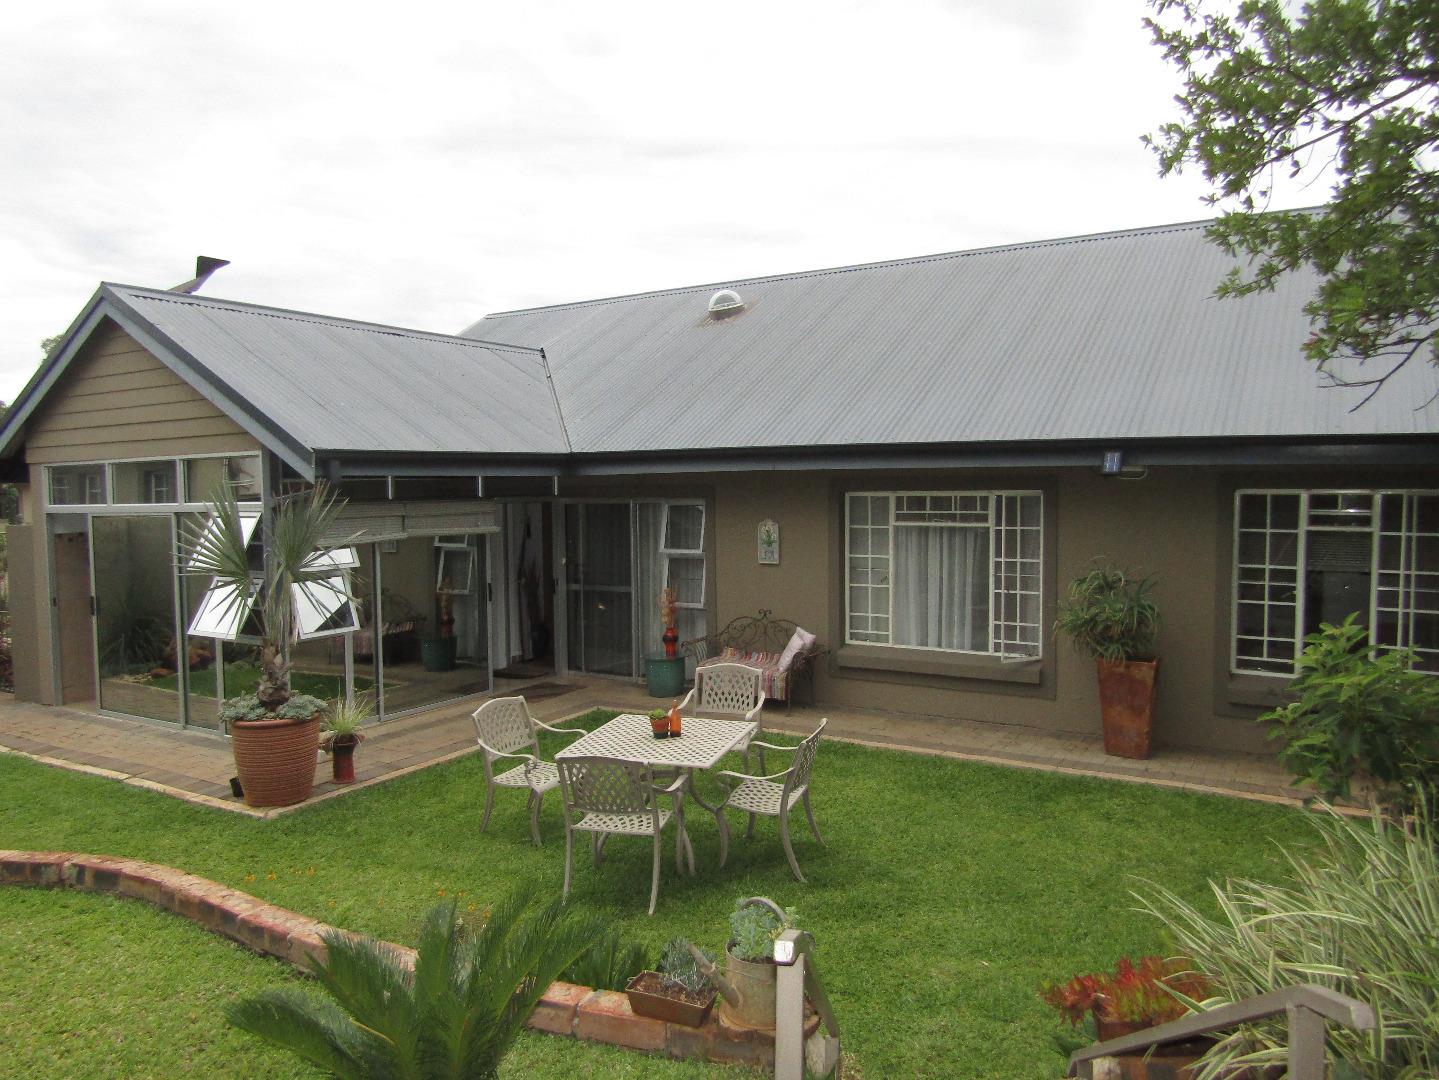 3 Bedroom House for Sale - Limpopo